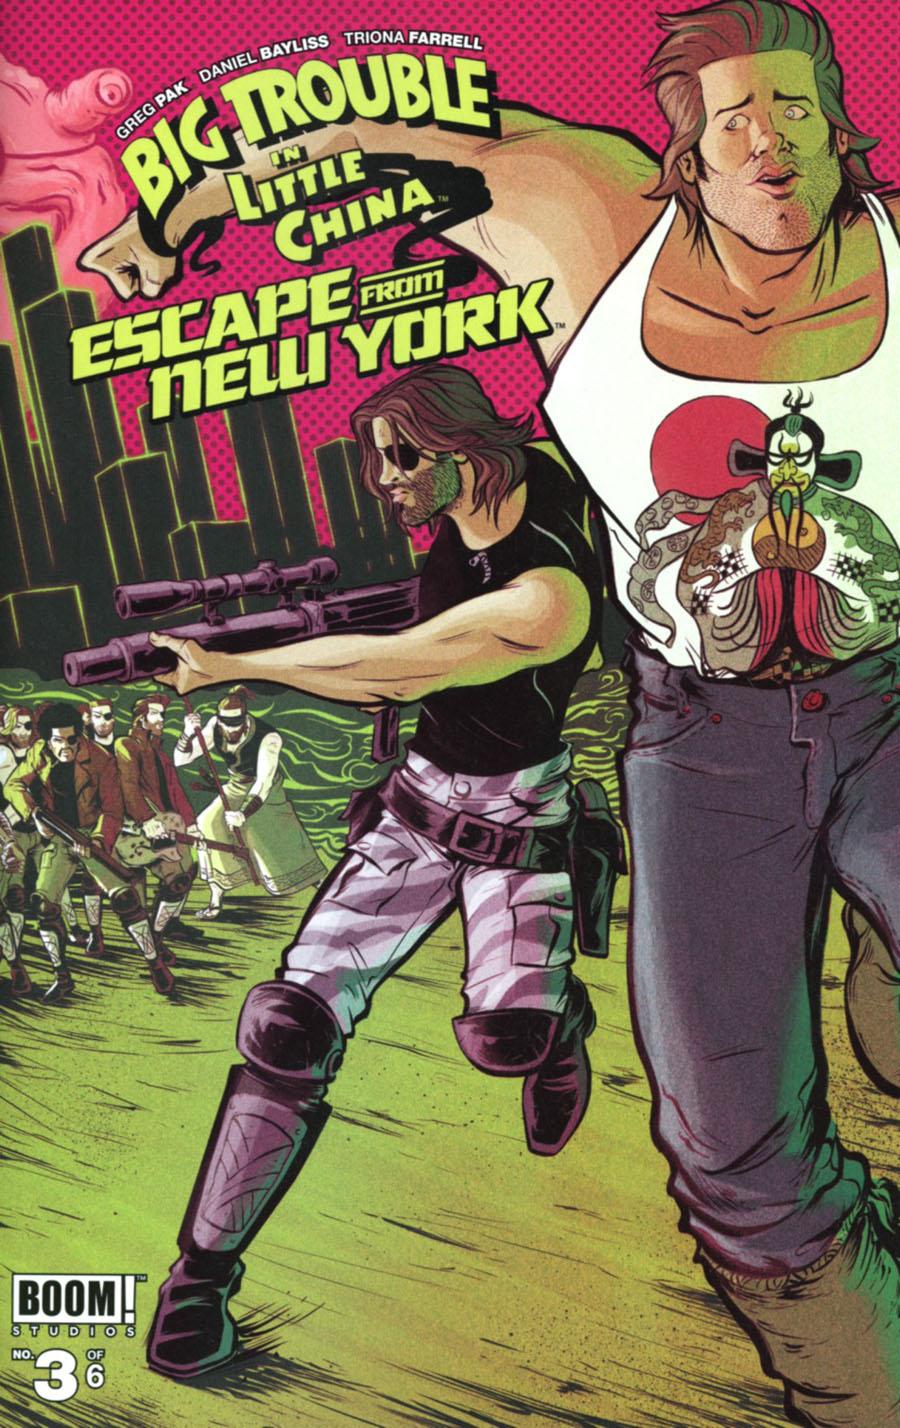 Big Trouble In Little China Escape From New York Vol. 1 #3